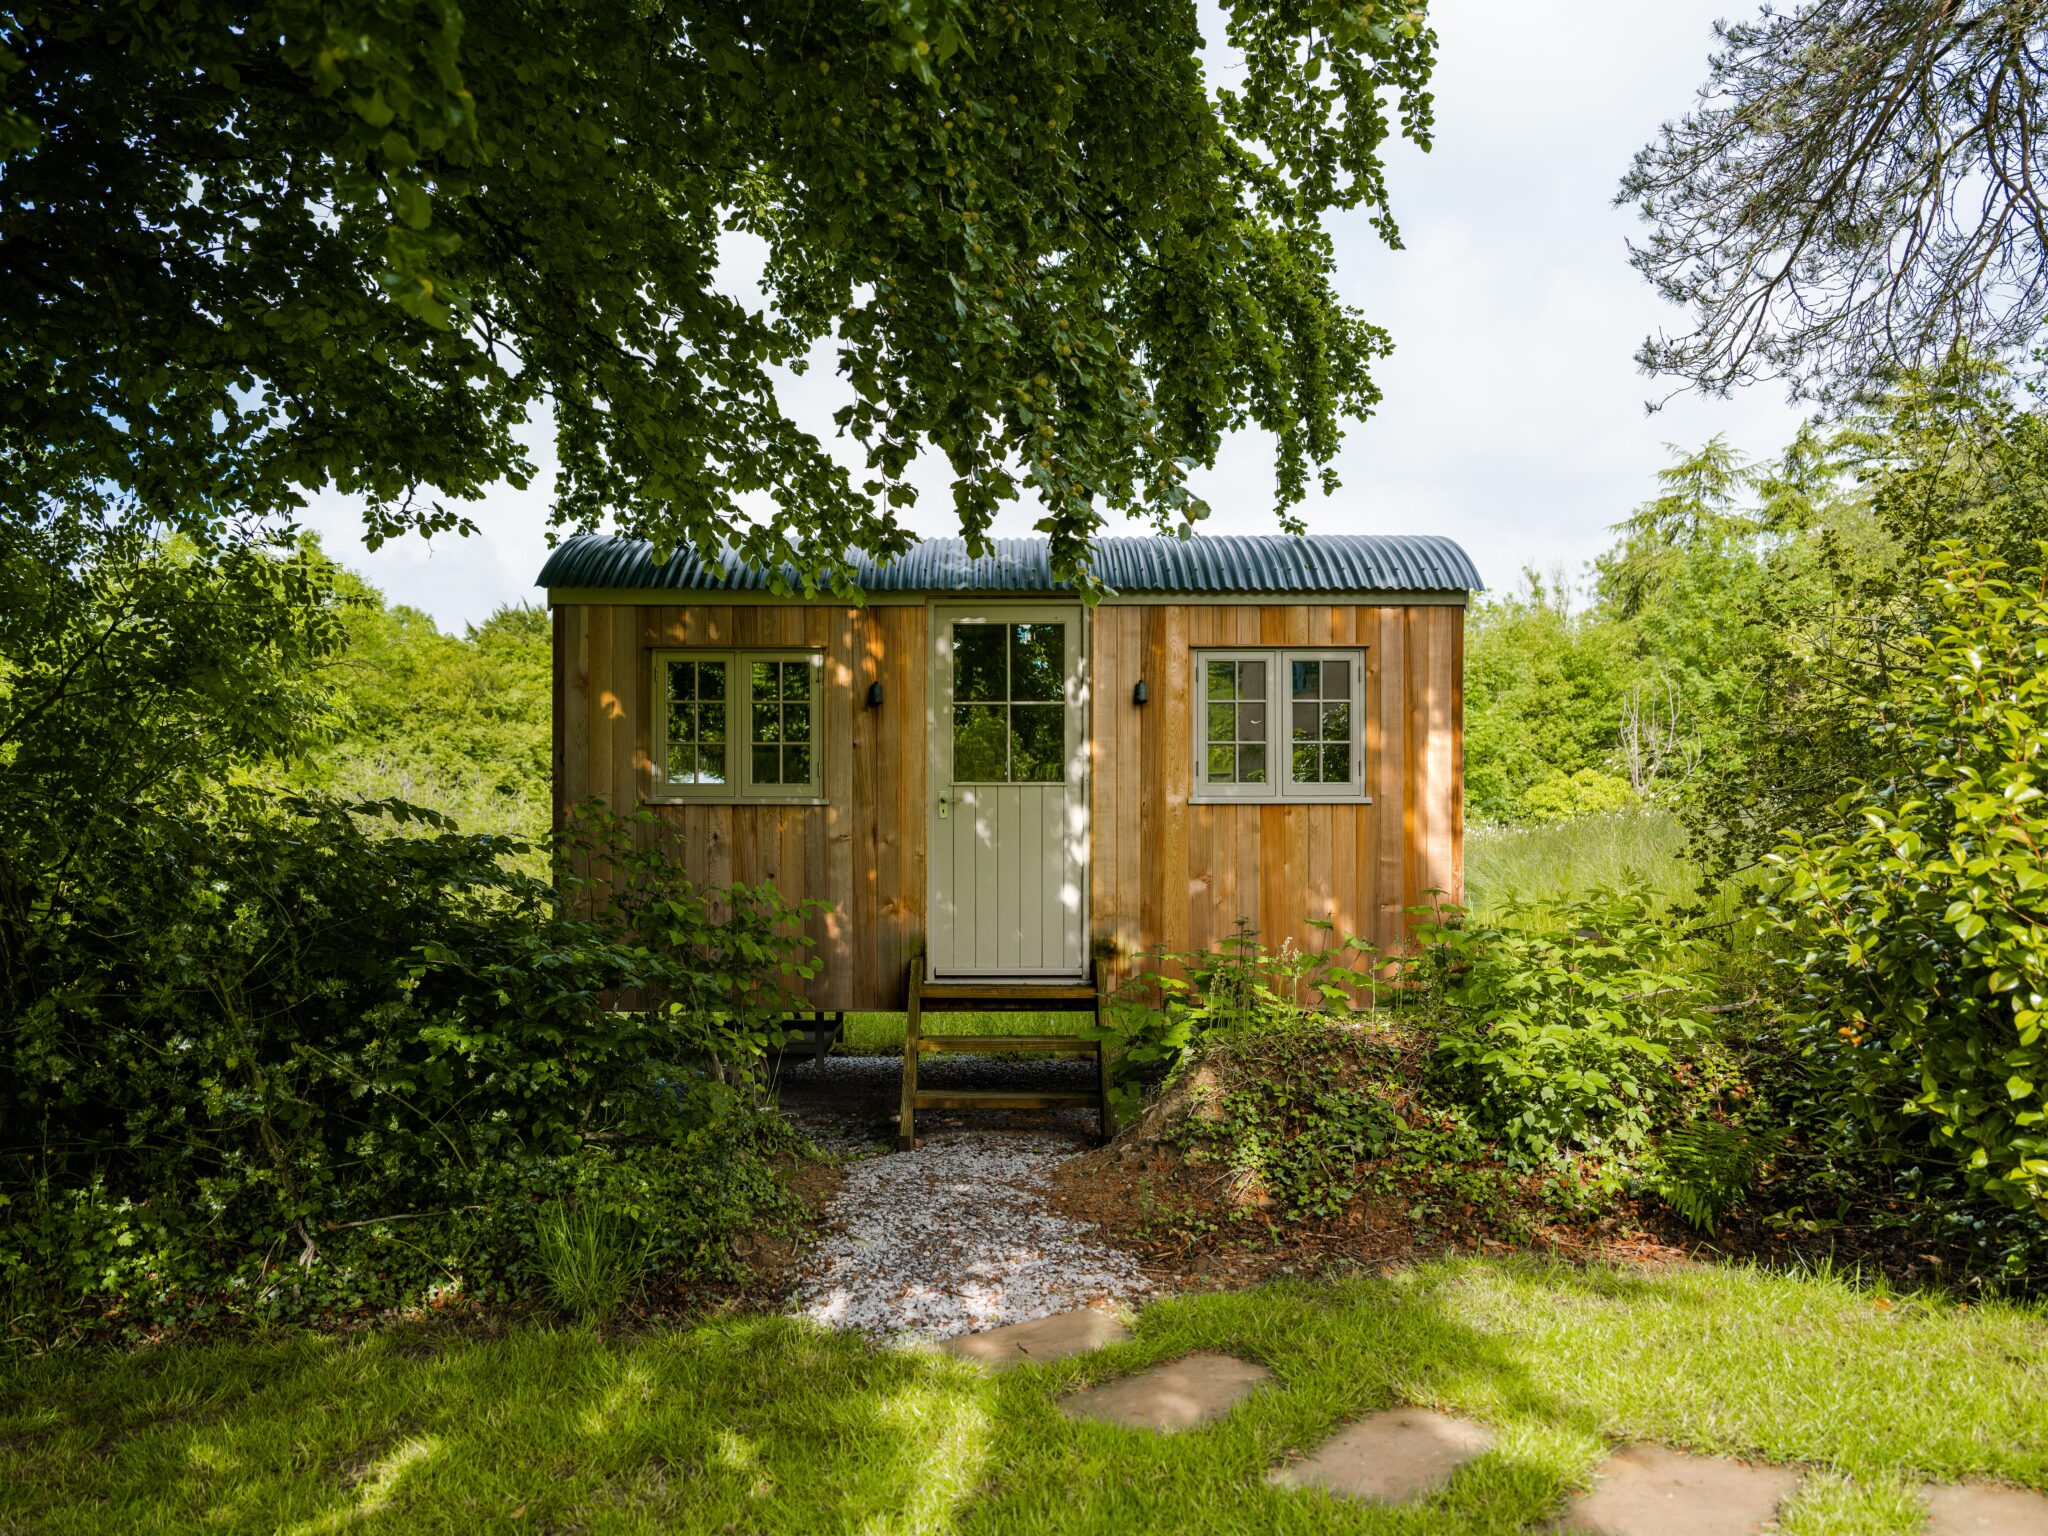 A shepherds hut shaded by a tree